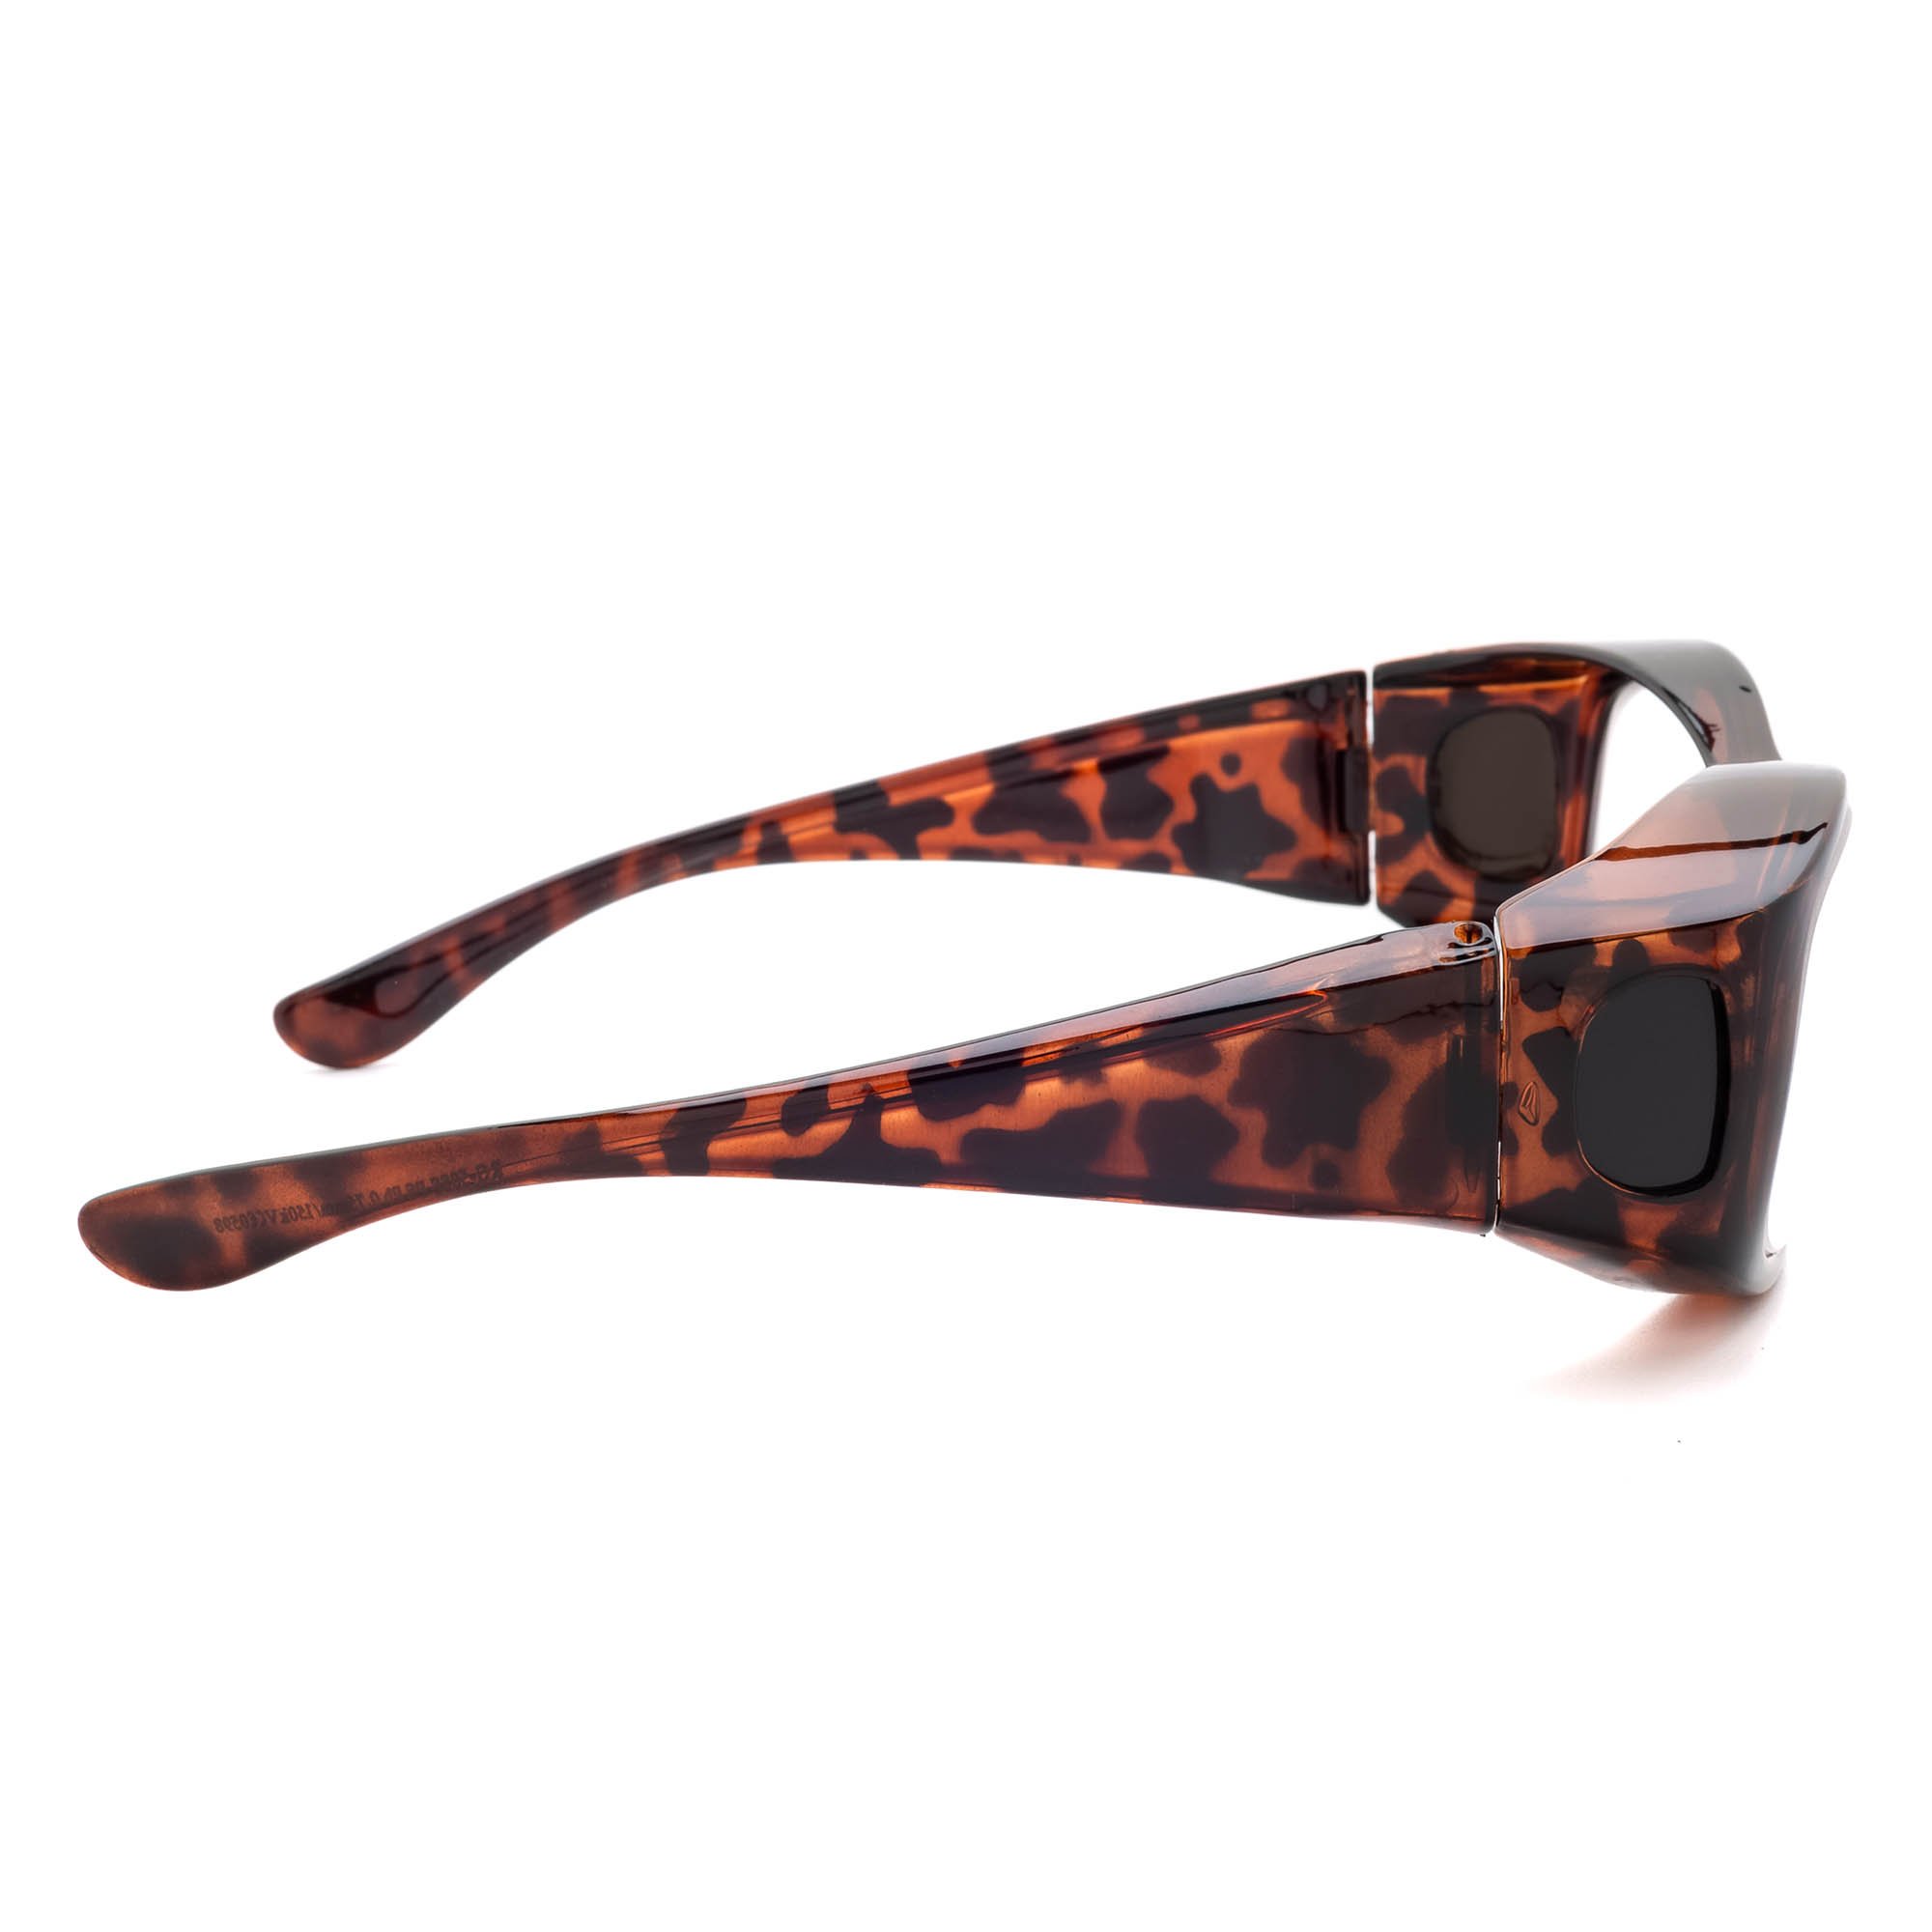 RG-33 Fit Over Lead Glasses